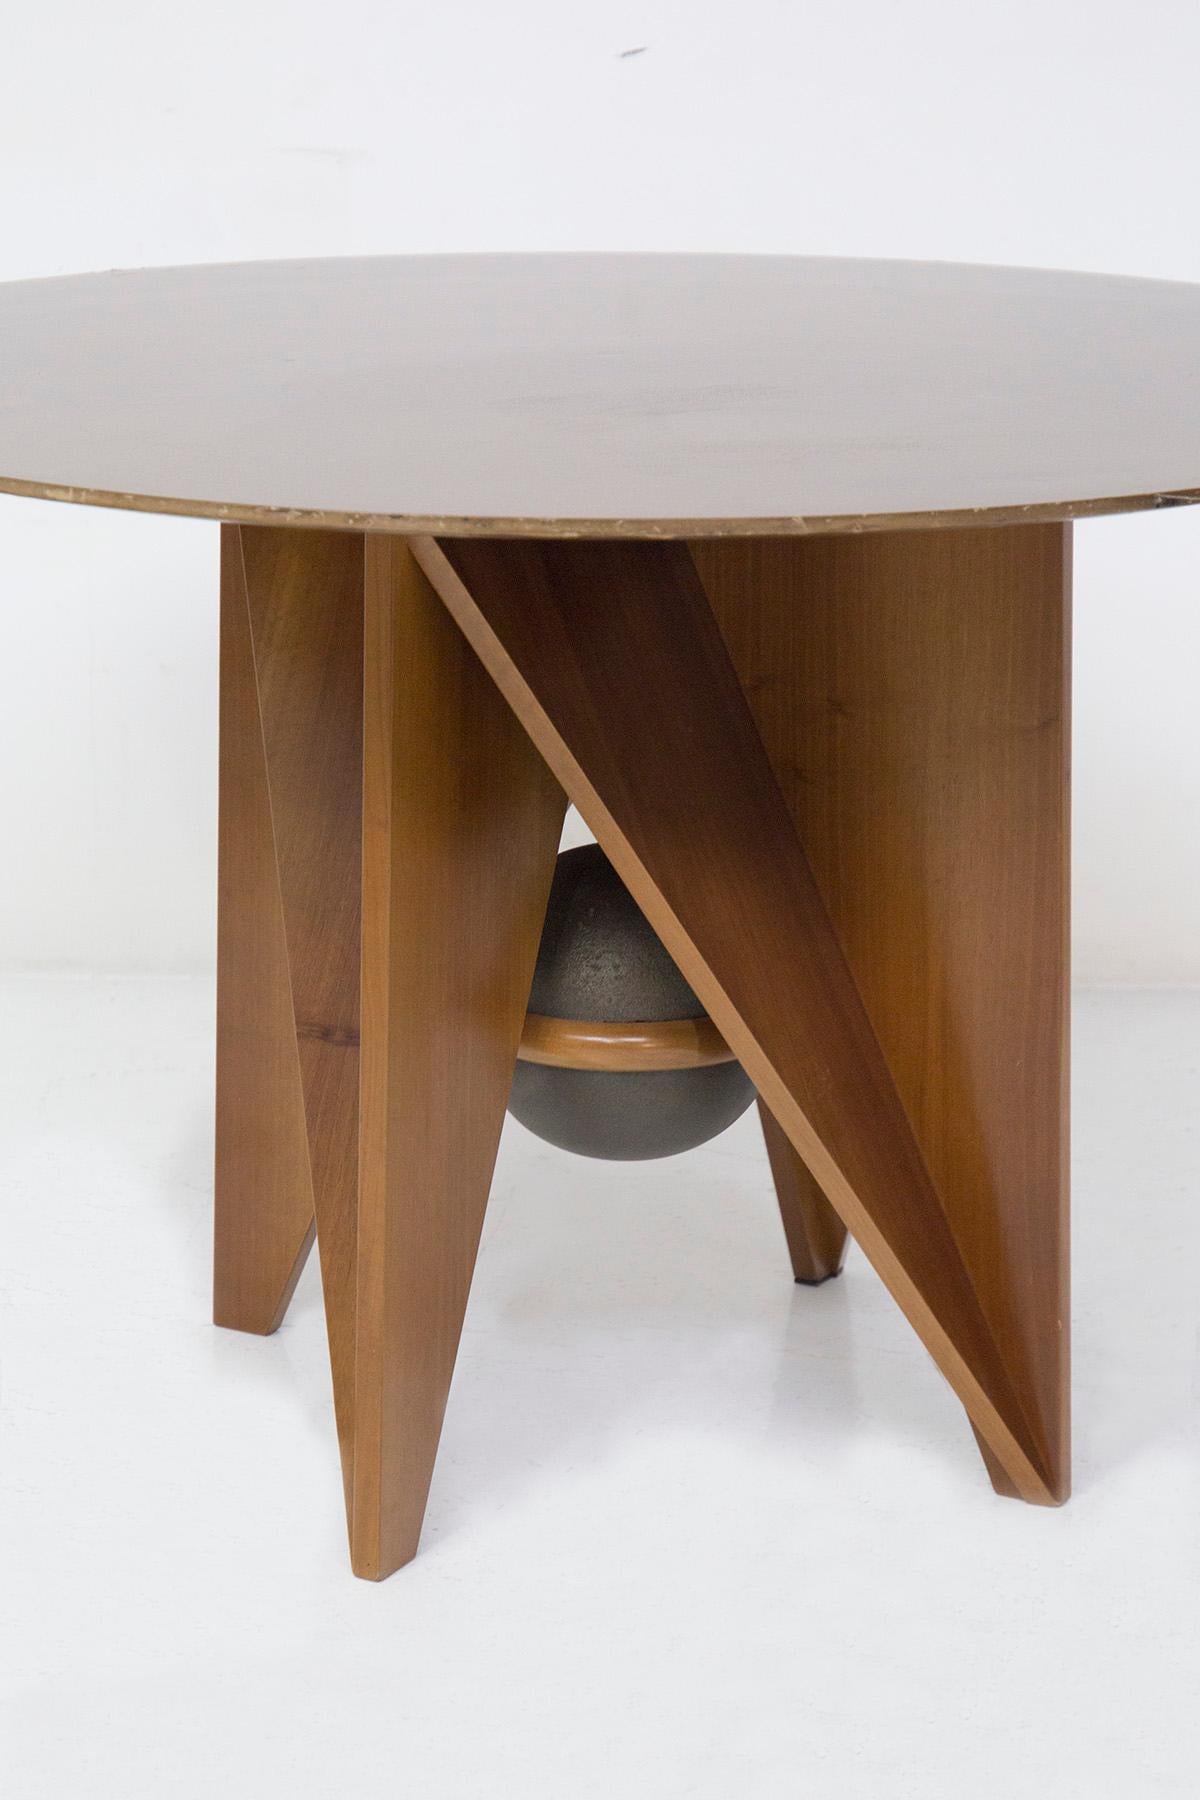 Beautiful prototype table designed by Paolo and Adriano Suman for the fine Italian manufacturer Giorgetti in the 1980s.
The table is made entirely of wood and has very geometric and distinctive shapes. There are 4 supporting legs and they have very